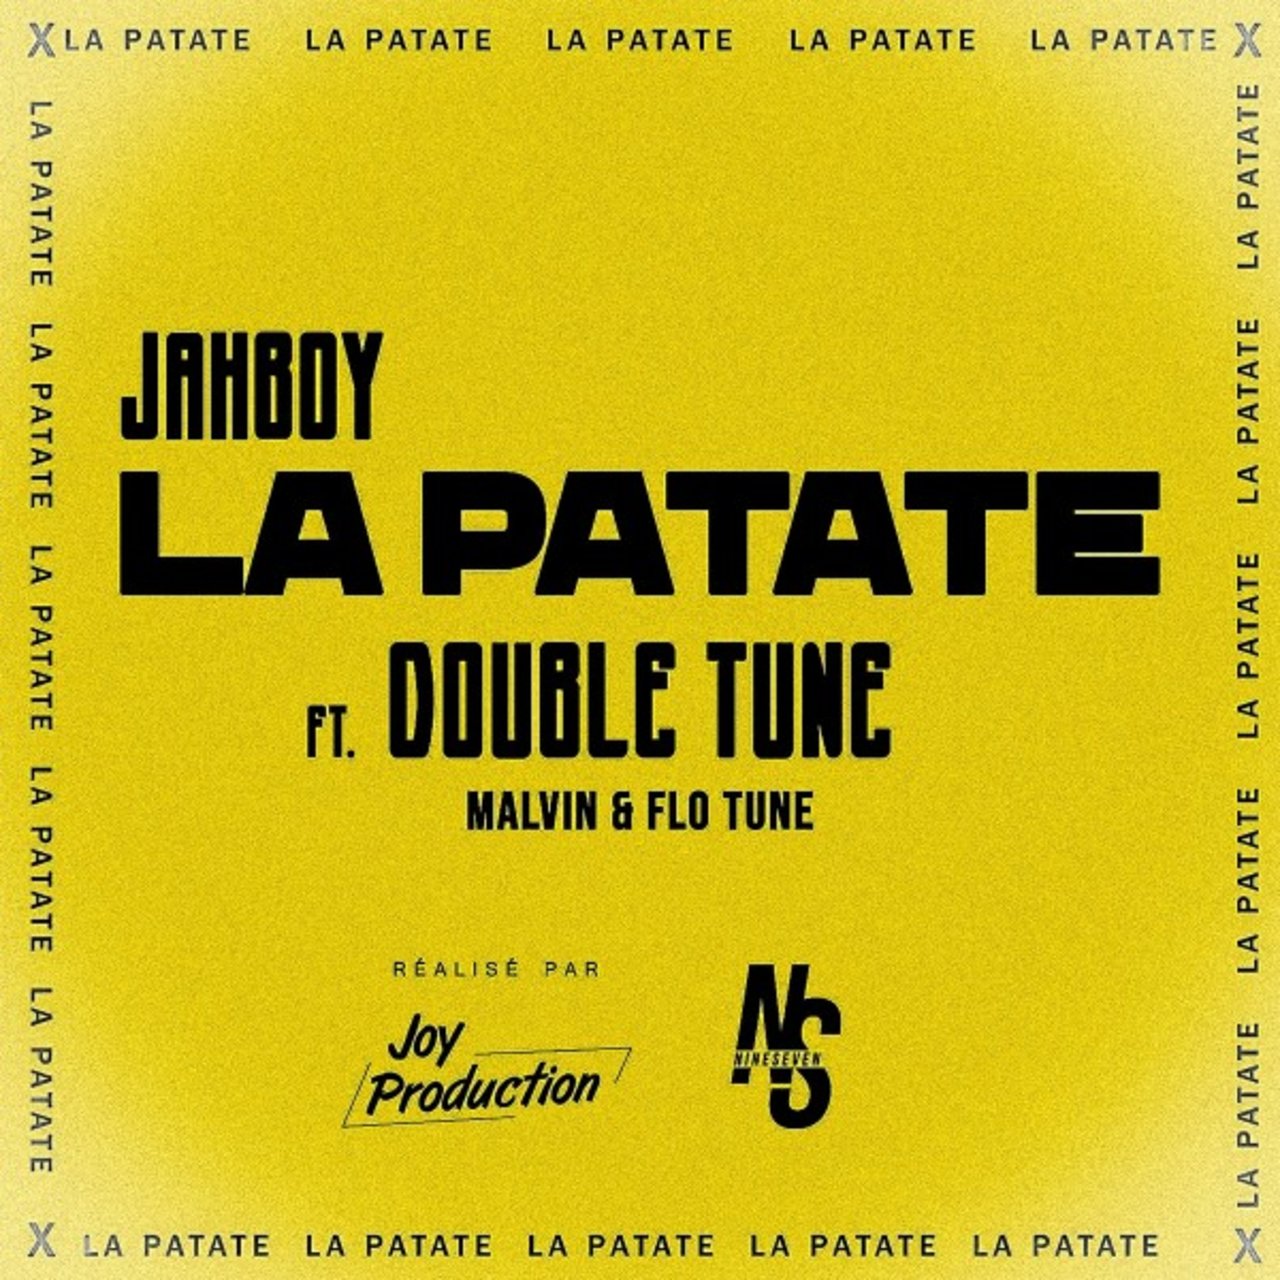 Jahboy - La Patate (ft. Double Tune) (Cover)